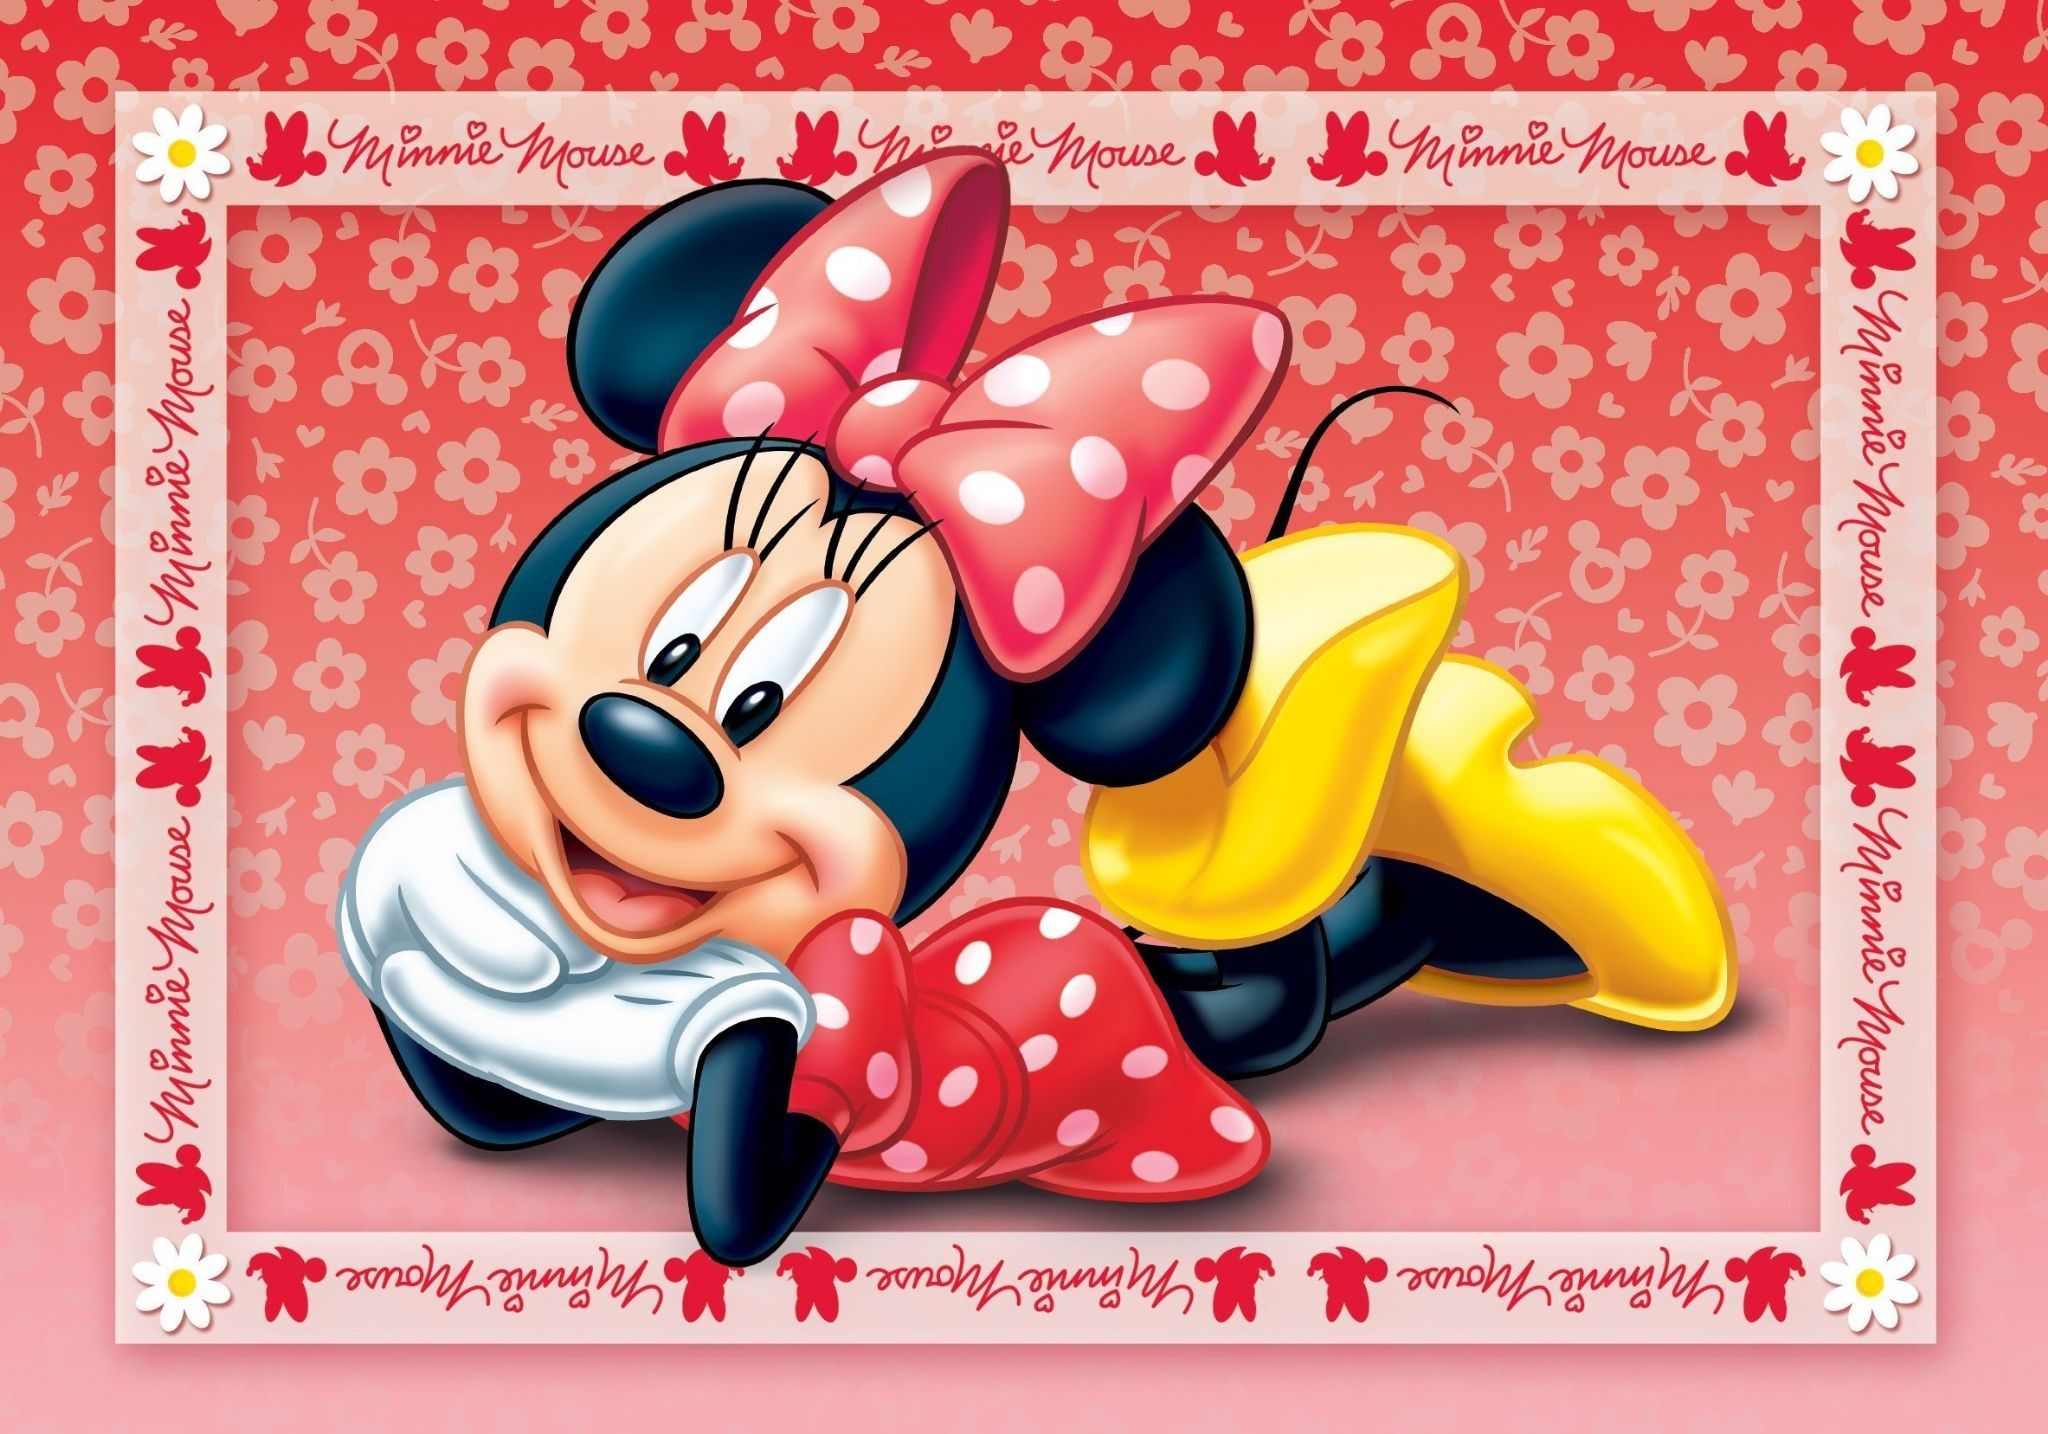 Minnie Mouse is a popular cartoon character - Minnie Mouse